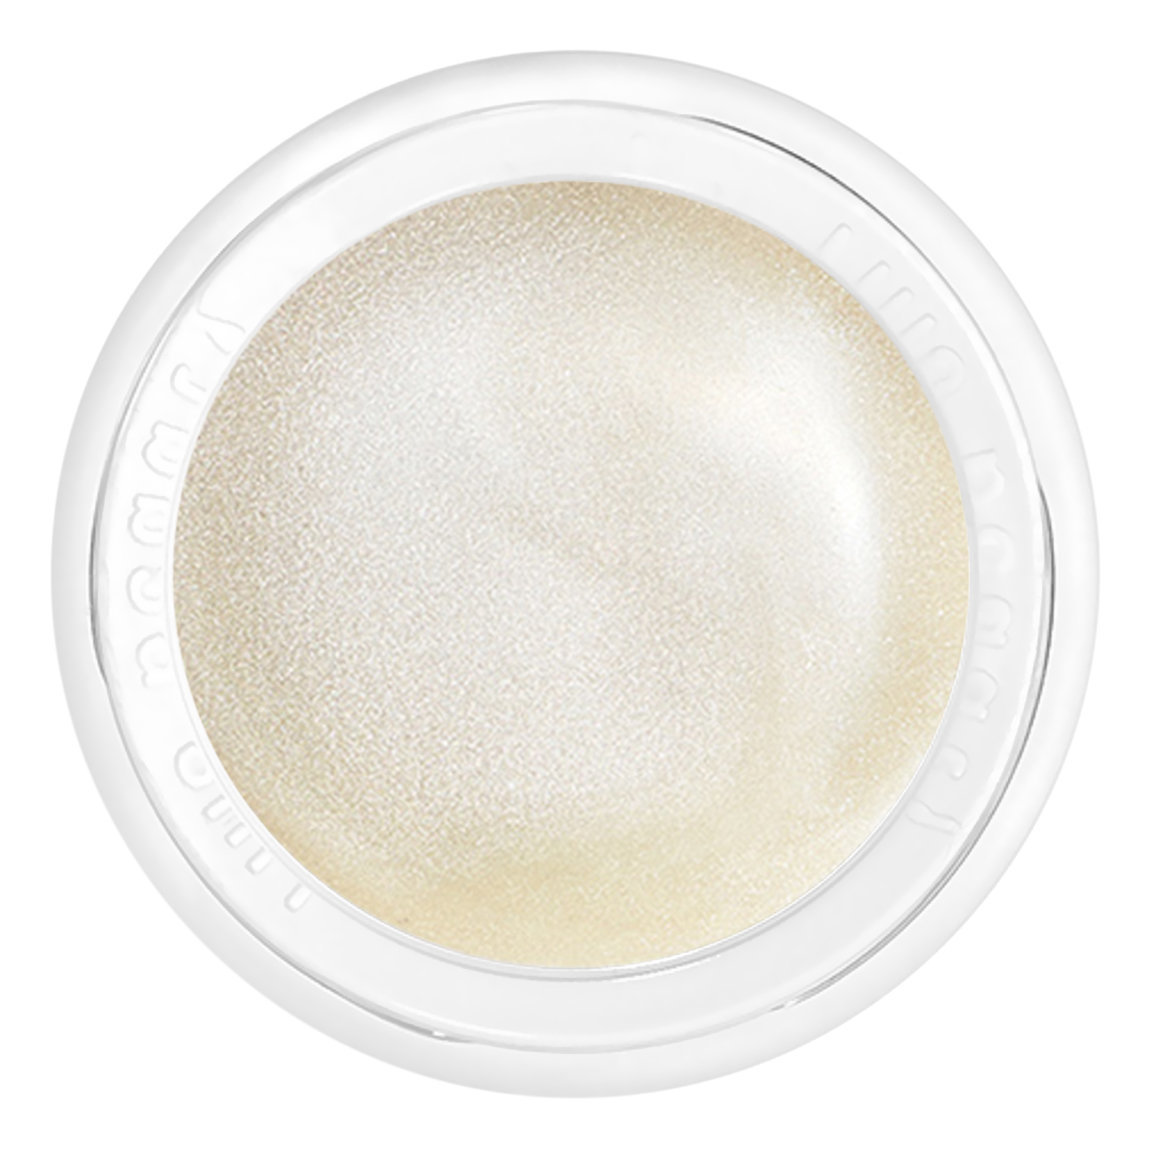 rms beauty Living Luminizer alternative view 1 - product swatch.